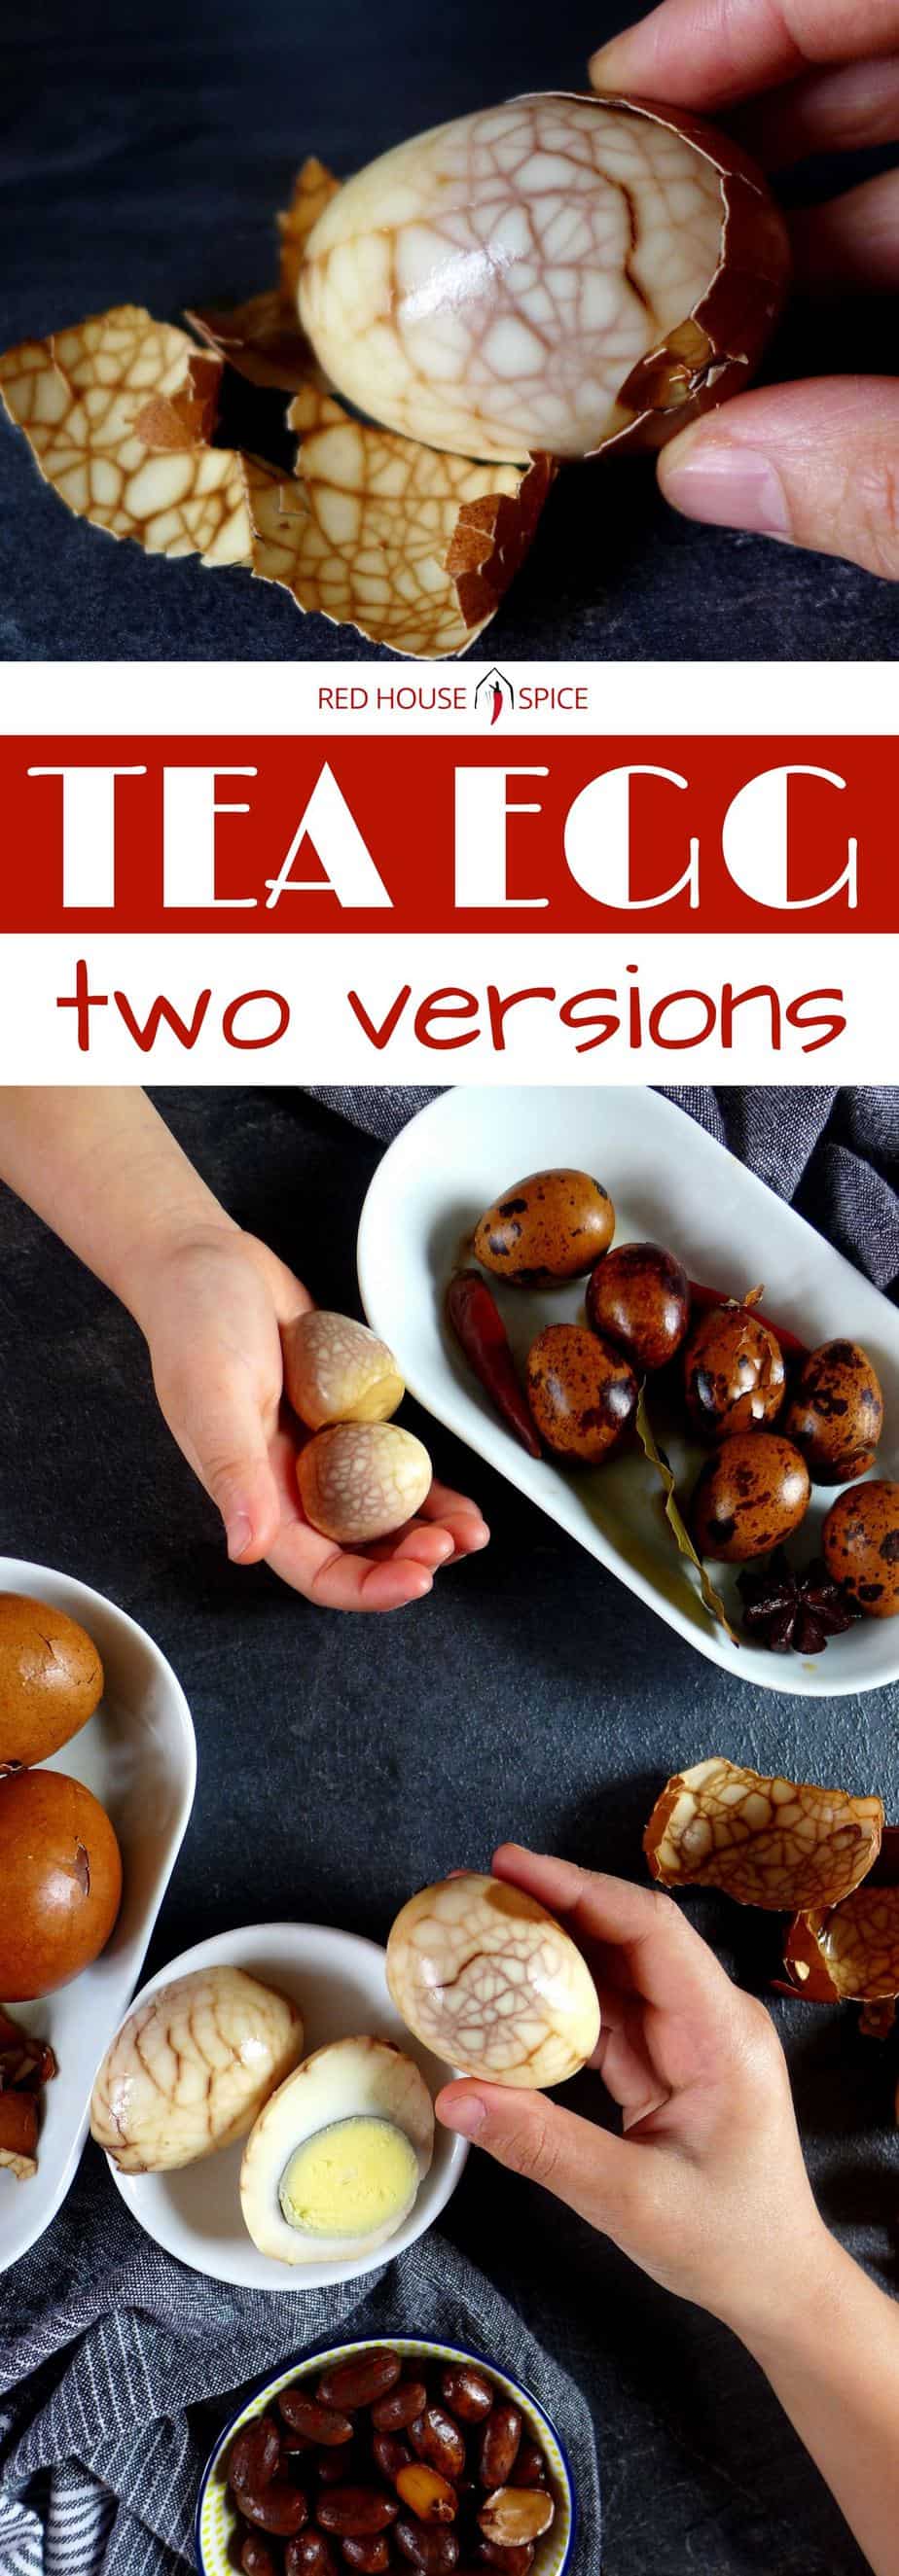 Probably the best way to enjoy hard boiled eggs! Chinese tea eggs are packed with flavour and have a beautiful marble look. Recipe in two versions provided.